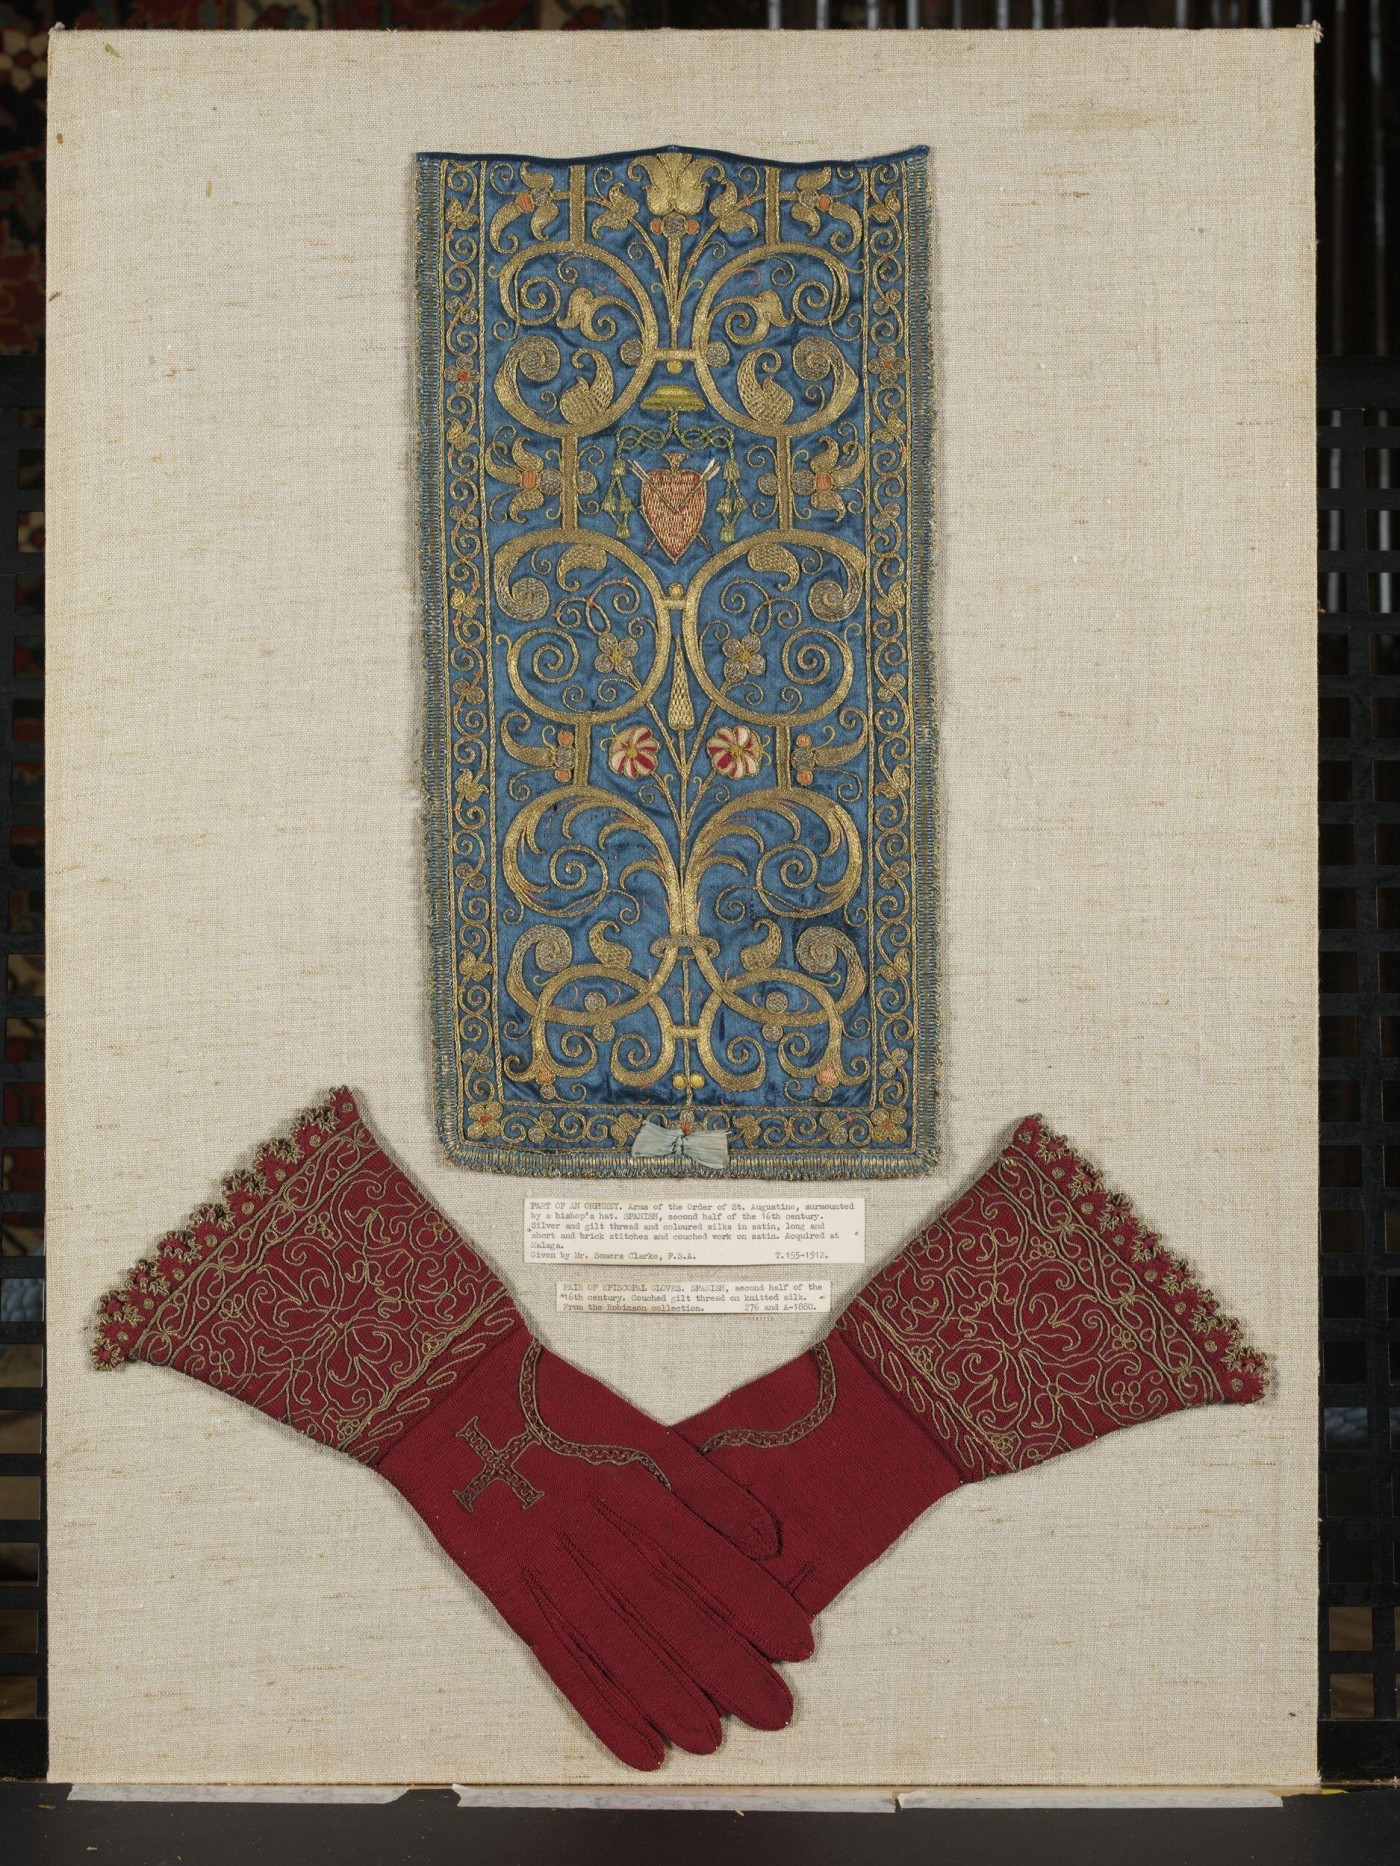 Pair of episcopal gloves, couched gilt thread on red knitted silk from the V&A collection. Source (http://collections.vam.ac.uk/item/O363886/pair-of-gloves-unknown/)